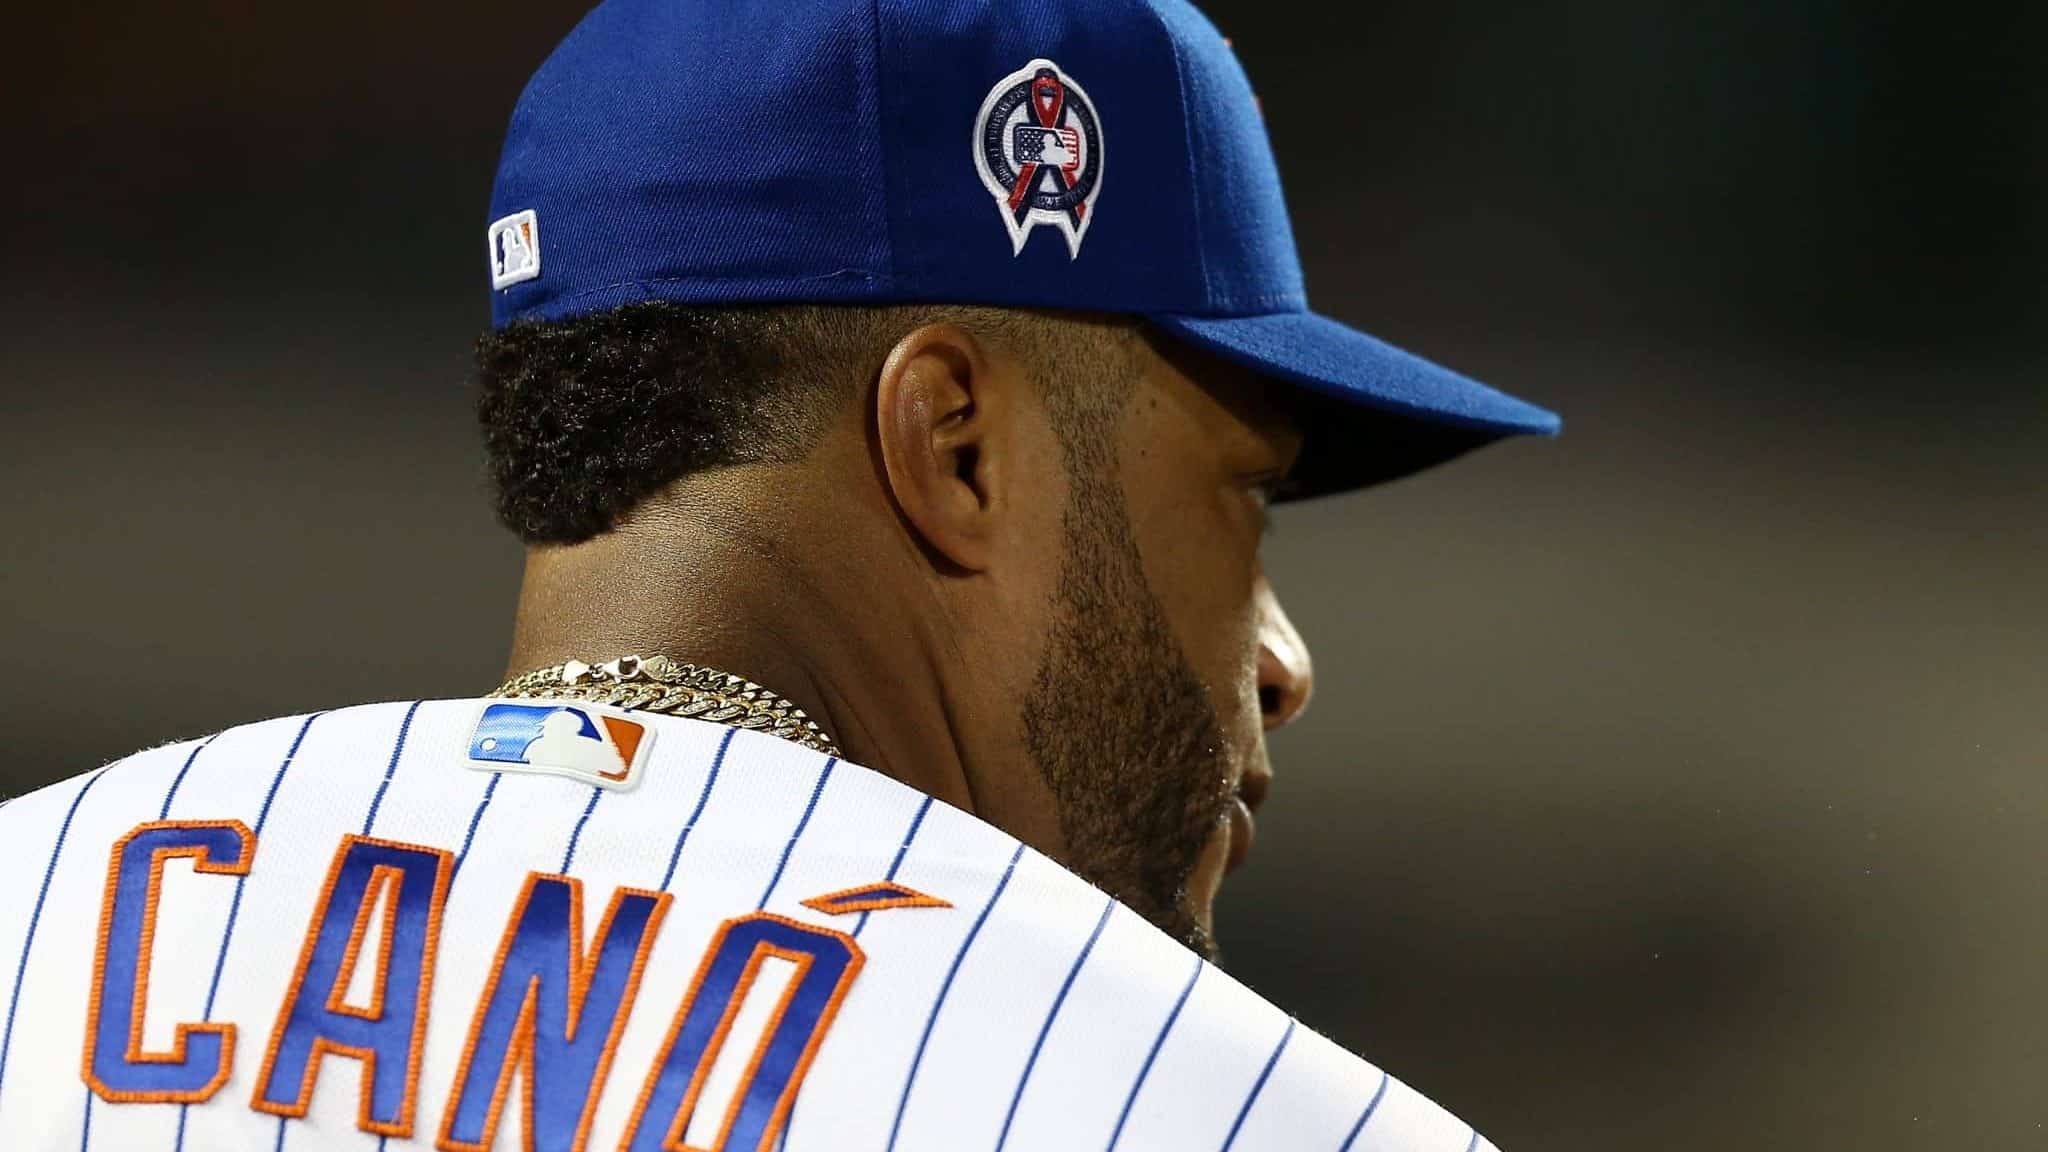 NEW YORK, NEW YORK - SEPTEMBER 11: Robinson Cano #24 of the New York Mets looks on wearing a patch on his cap in honor of the 18th anniversary of the September 11, 2001 terror attacks prior to the game against the Arizona Diamondbacks at Citi Field on September 11, 2019 in the Queens borough of New York City.